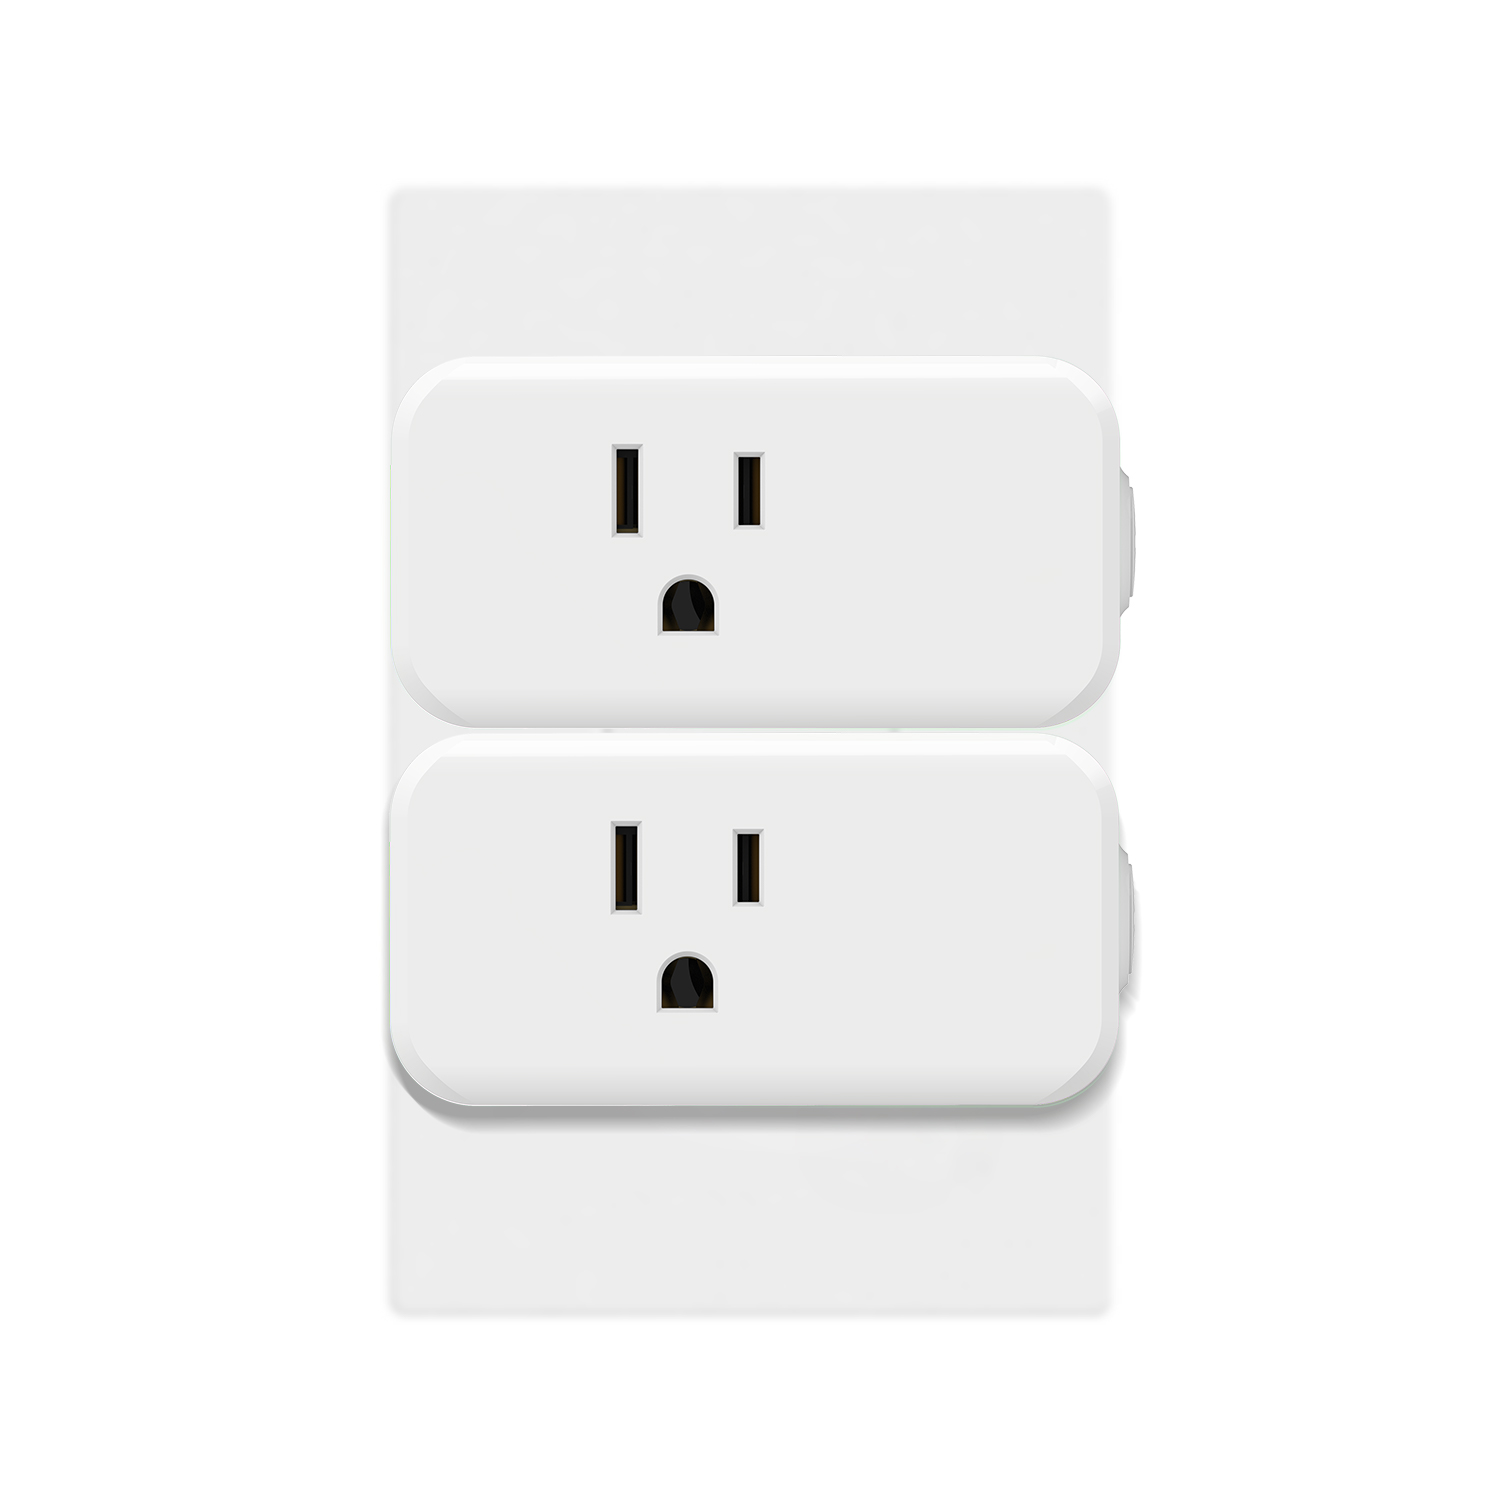 Minoston Z-Wave Smart Plug 700 Series Work with SmartThings, Homeseer,  Vera, Wink, Alexa, Google Assistant, Z-Wave Hub Required, FCC ETL Listed -  Yahoo Shopping